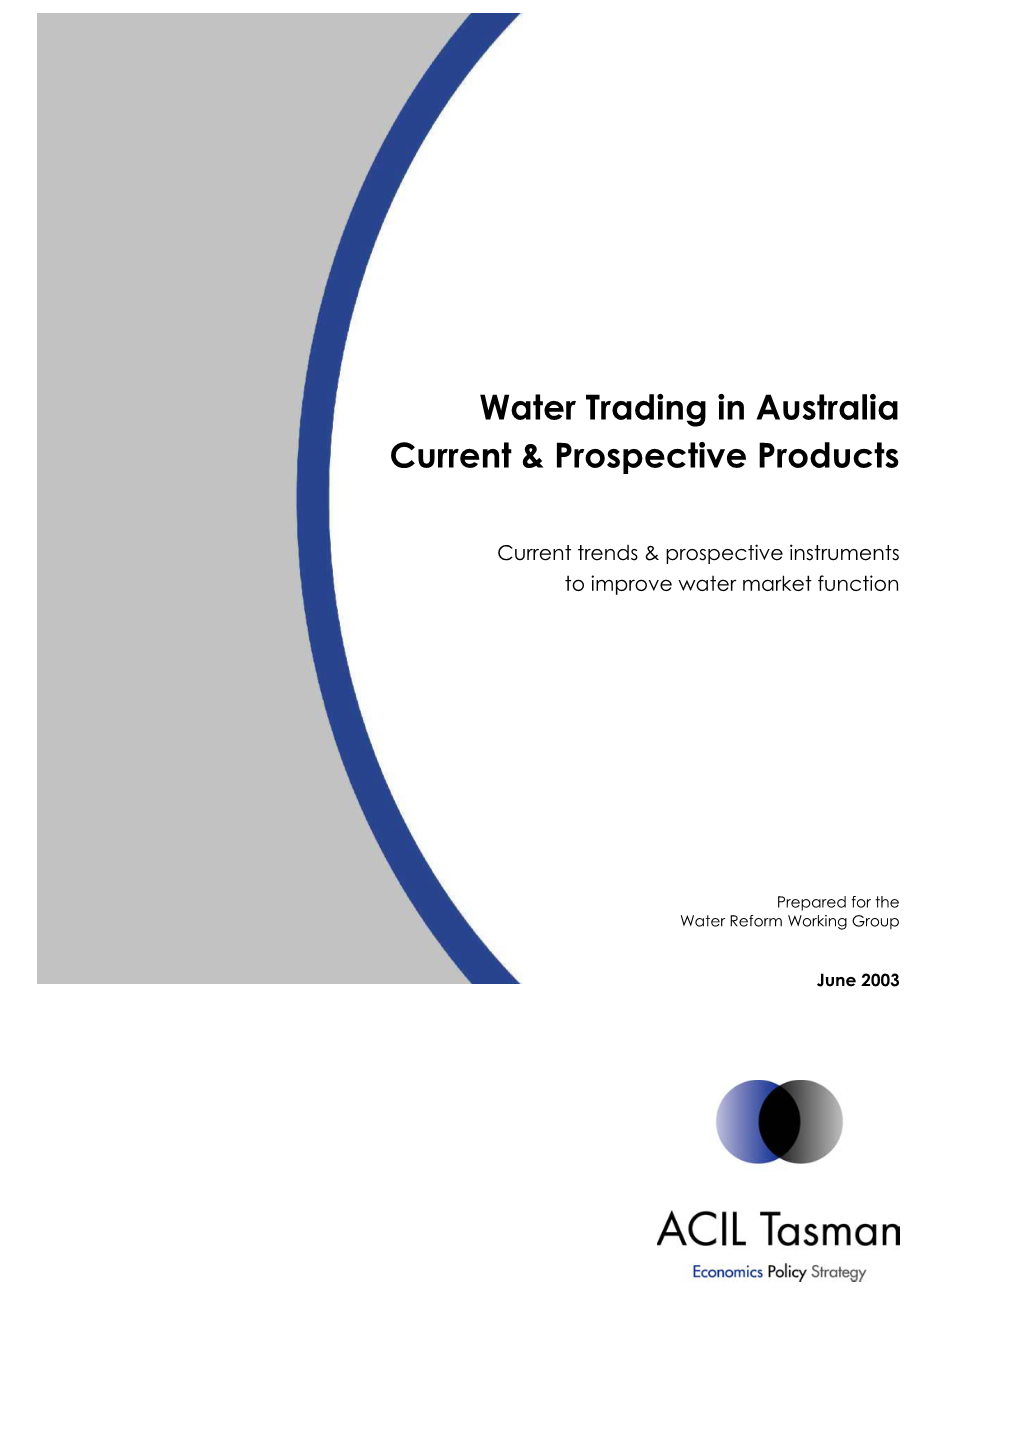 Water Trading in Australia Current & Prospective Products